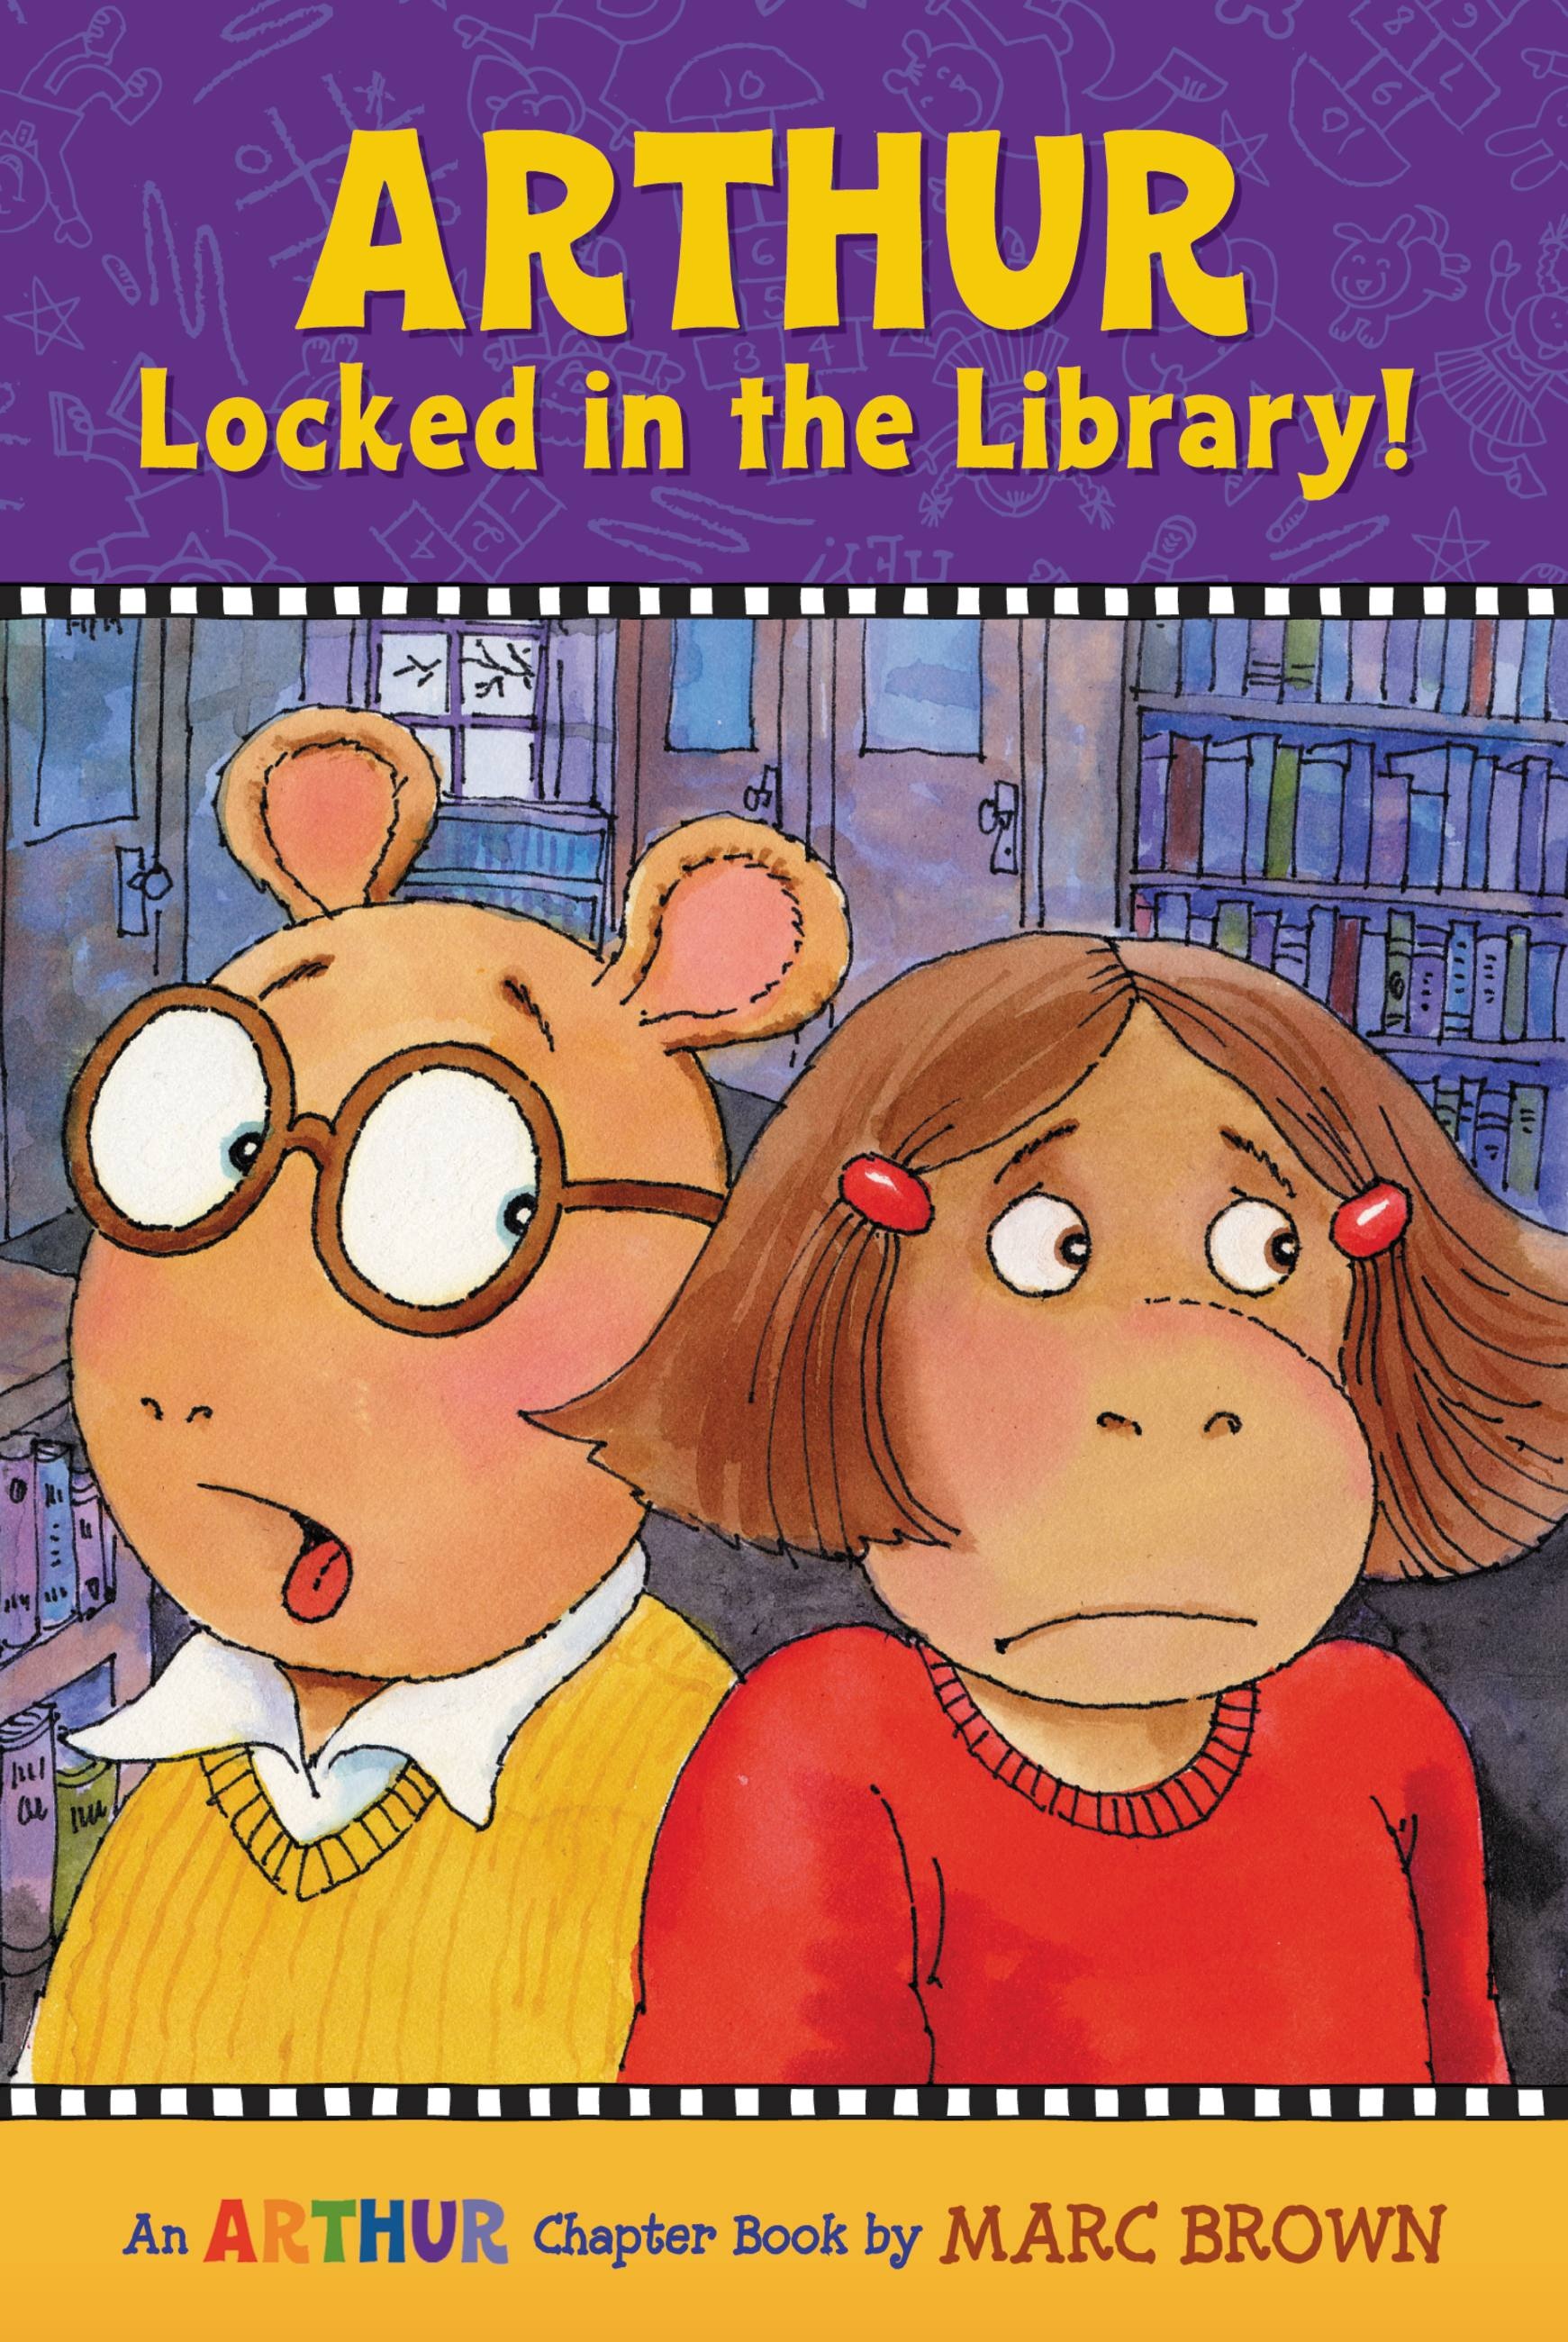 Arthur Locked in the Library! by Marc Brown | Hachette Book Group